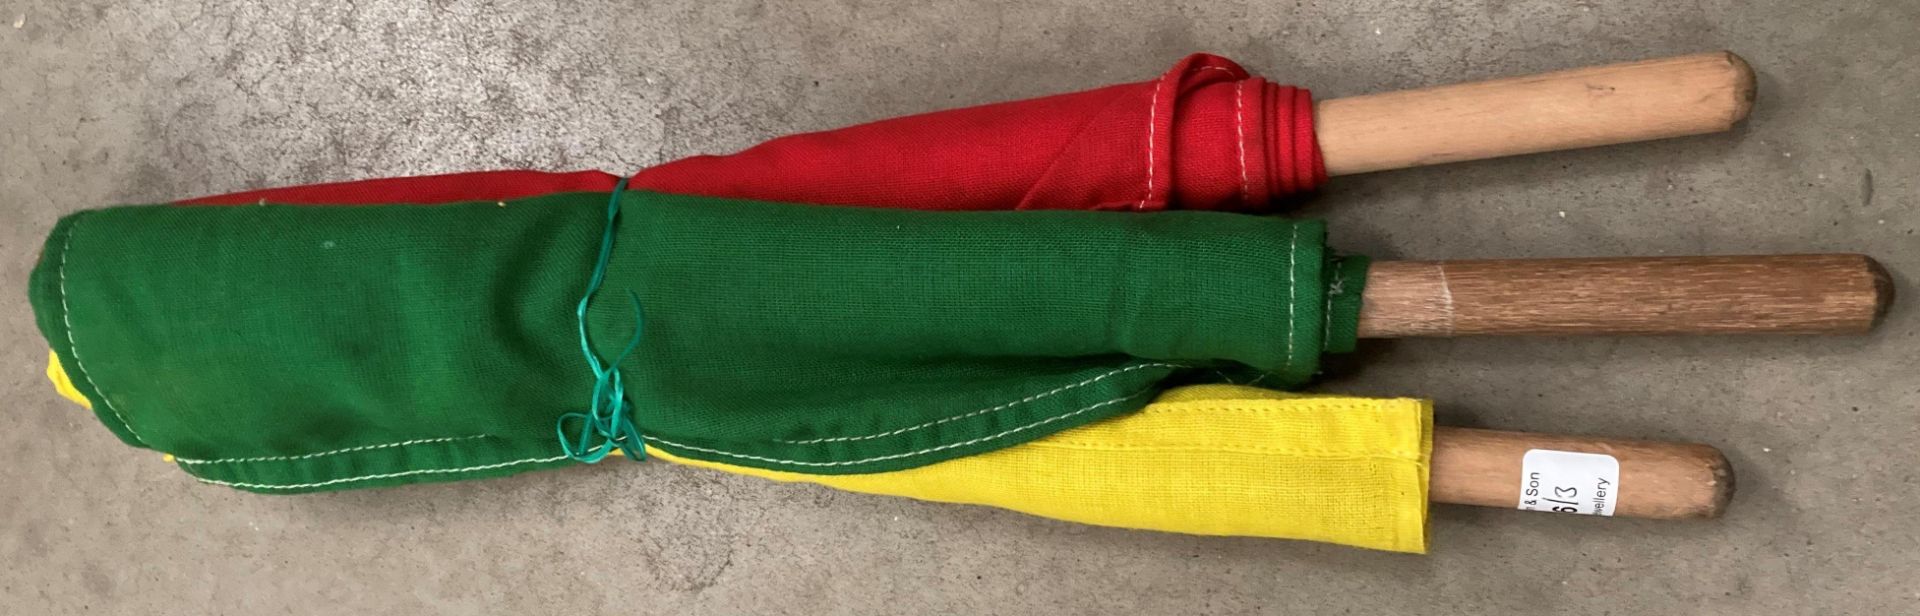 Three Station Masters flags - red, yellow and green.